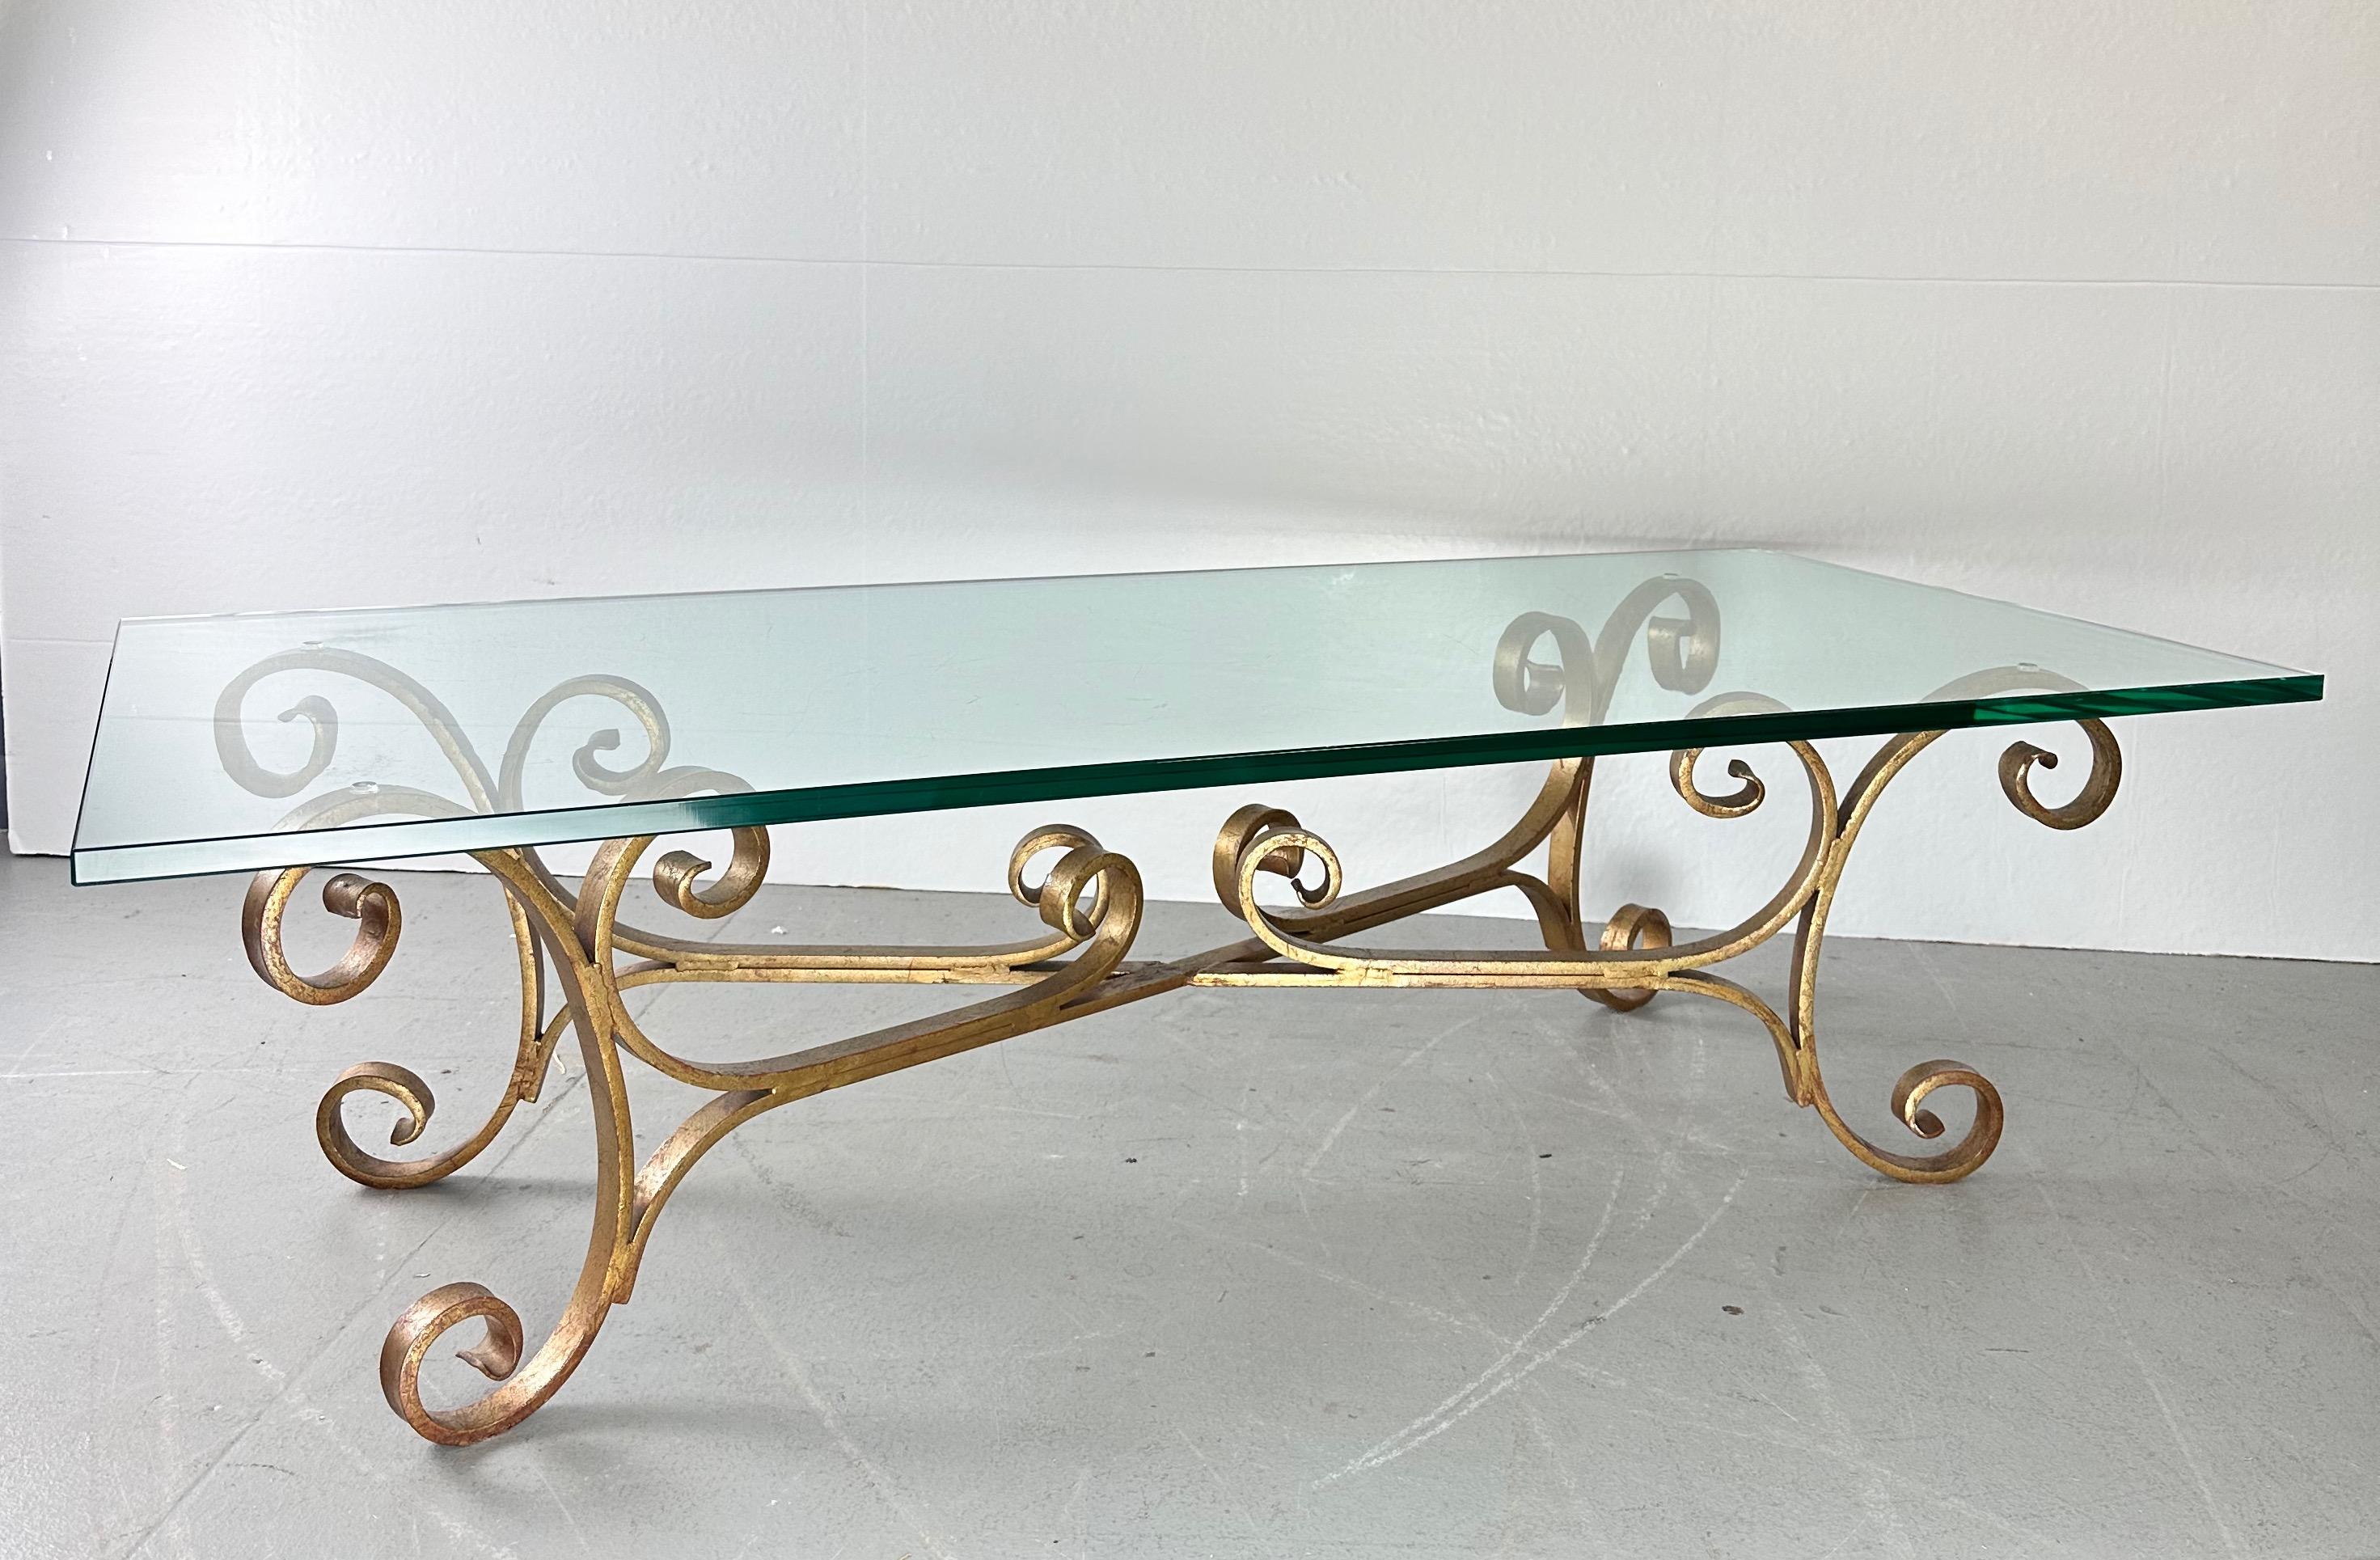 Lovely curvaceous table base iron with gilding and a bit of Chinese red paint showing through, gives this table a real touch of elegance. The heavy base holds a nice piece of 1